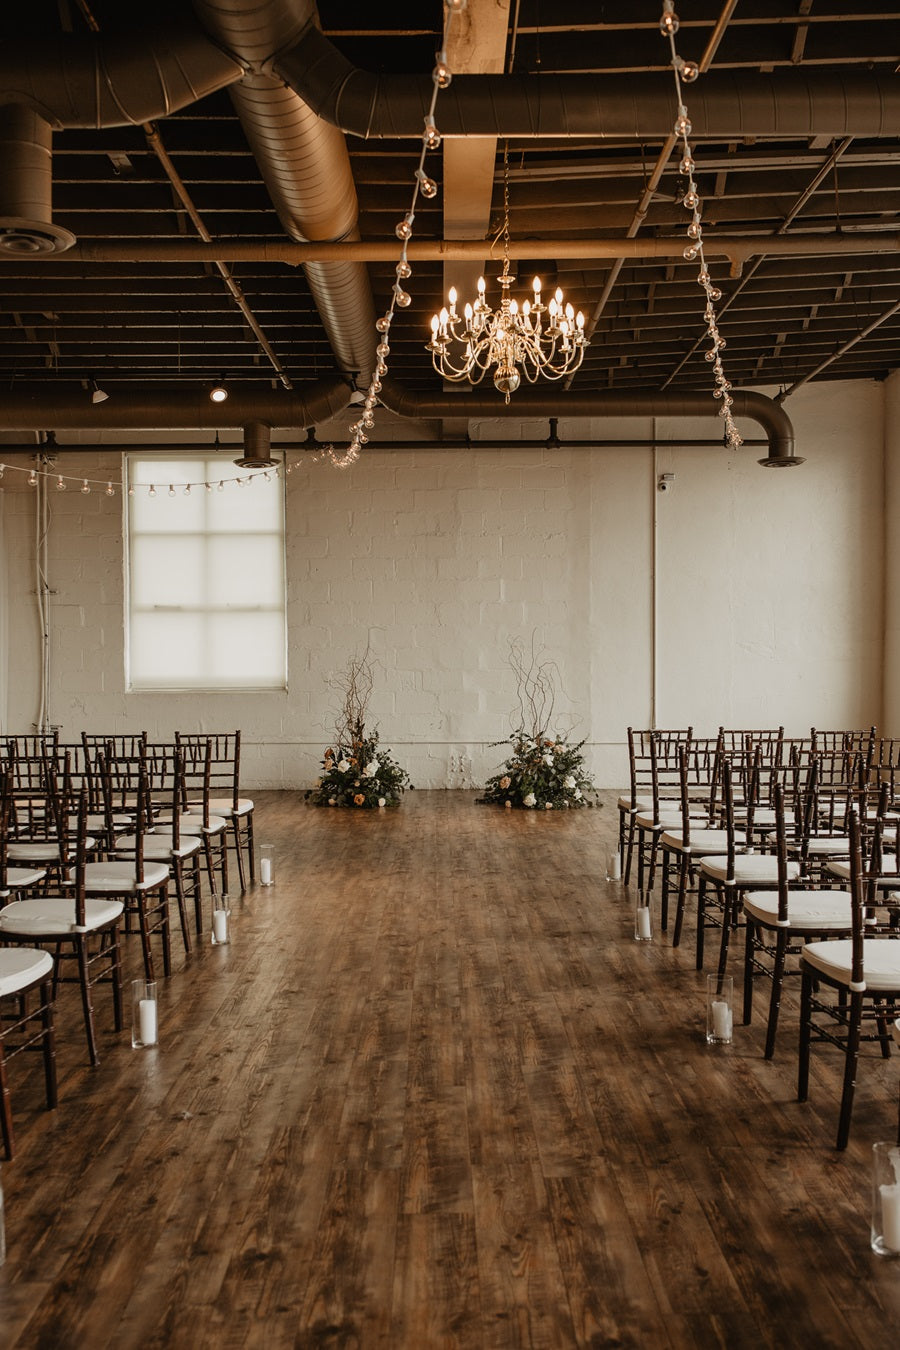 Preview ceremony shot right down the center of the aisle. Chairs line either side, with tall floral floor pieces to frame the bride and groom. Branching adds height and shape to the arrangements.